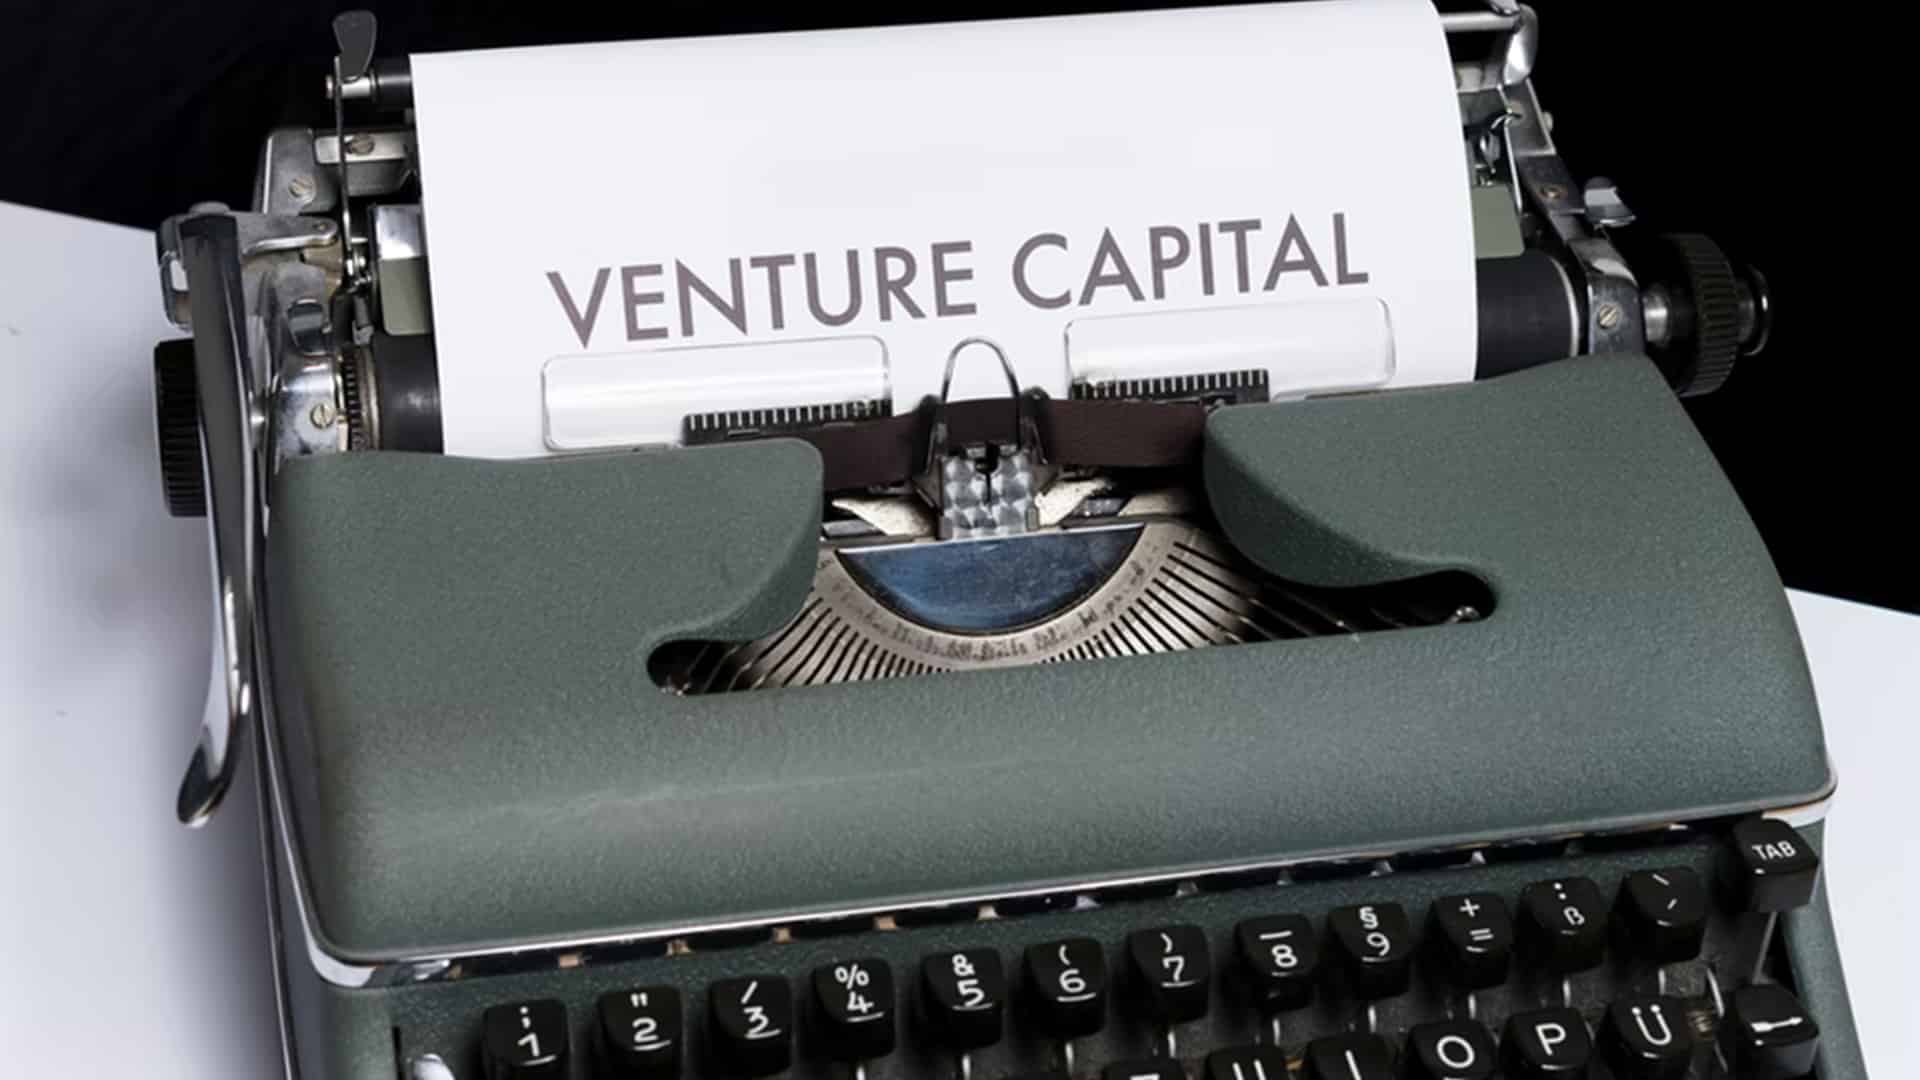 Five early-stage VCs and accelerators banking heavily on deep tech startups